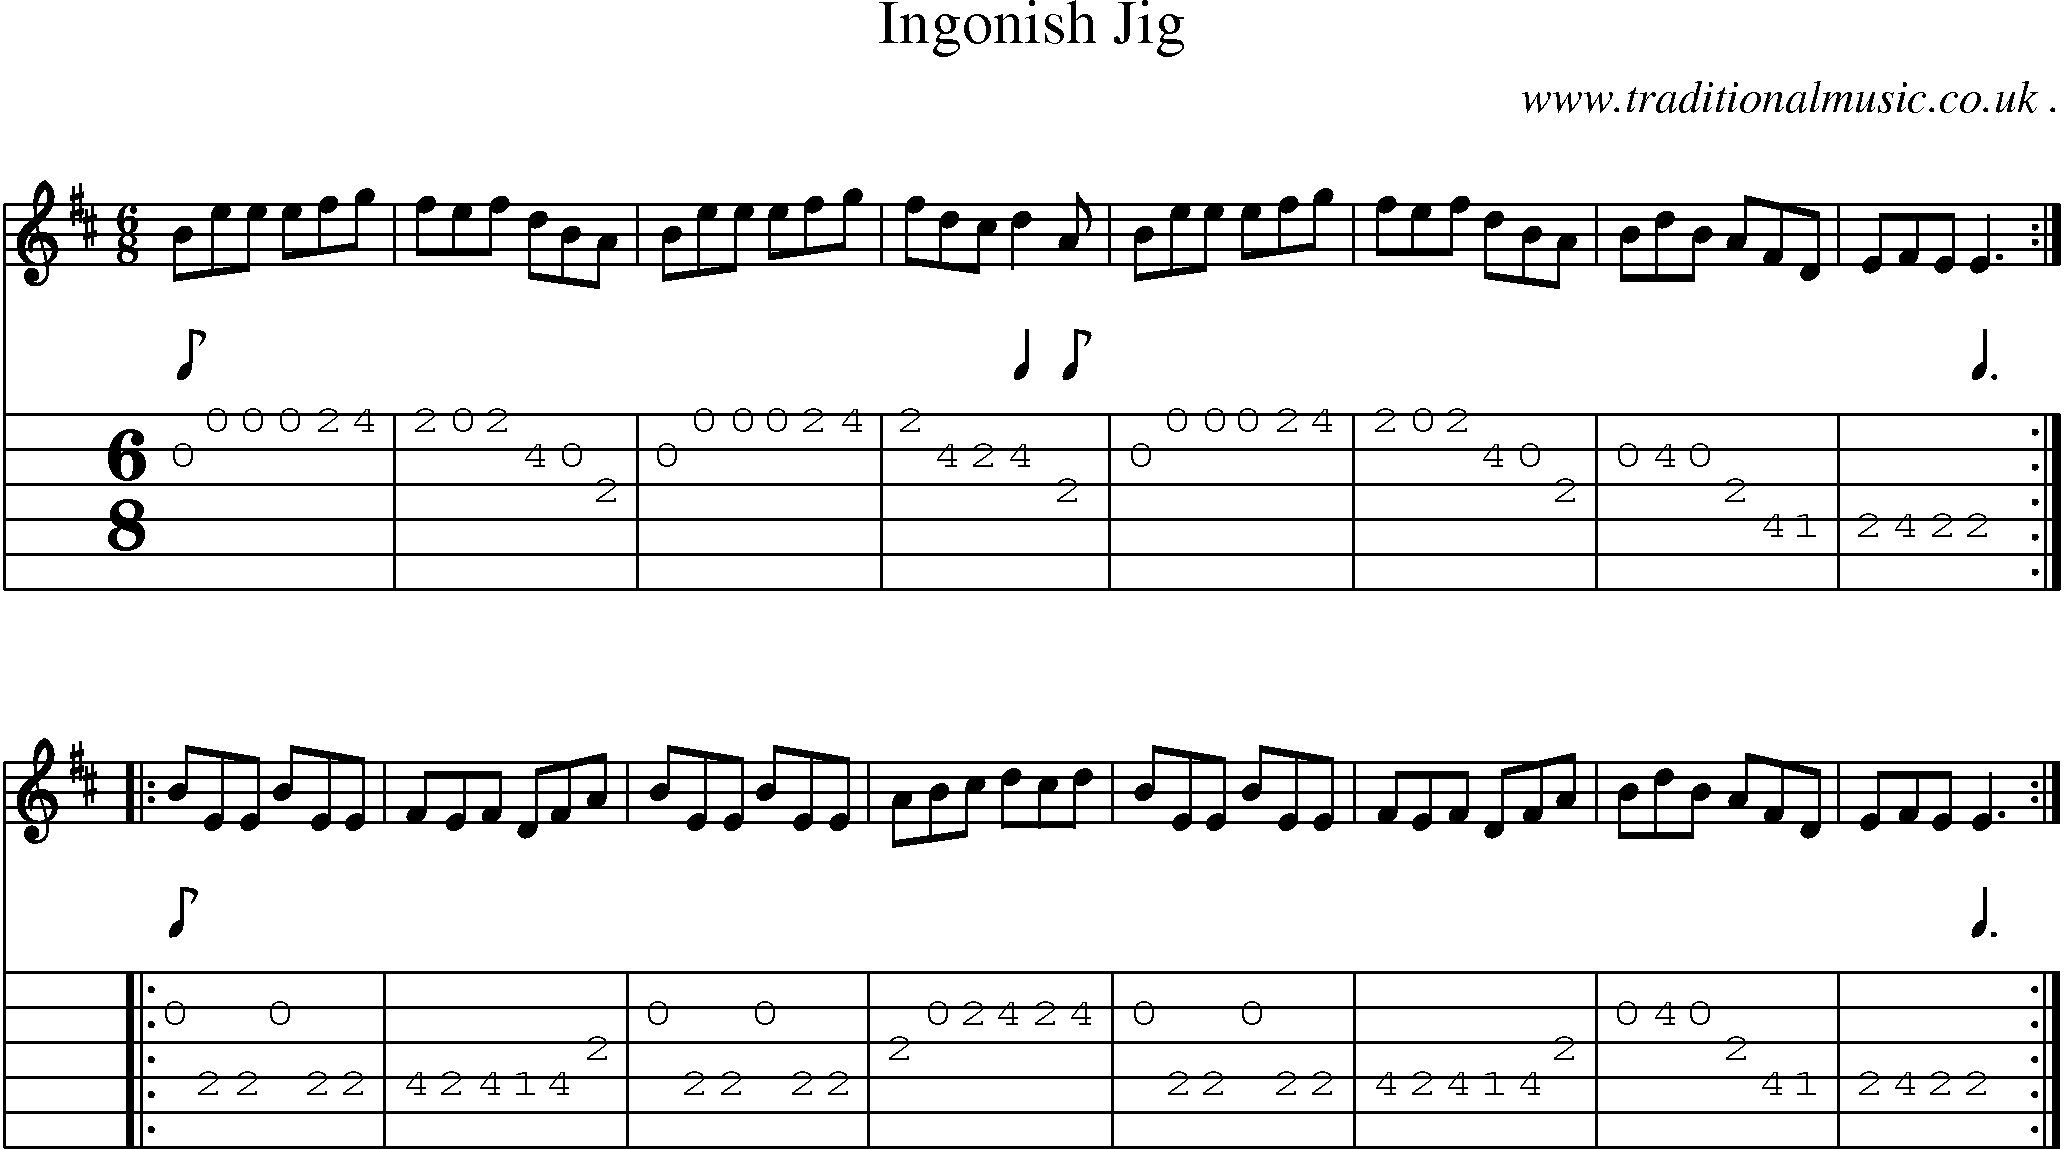 Sheet-Music and Guitar Tabs for Ingonish Jig